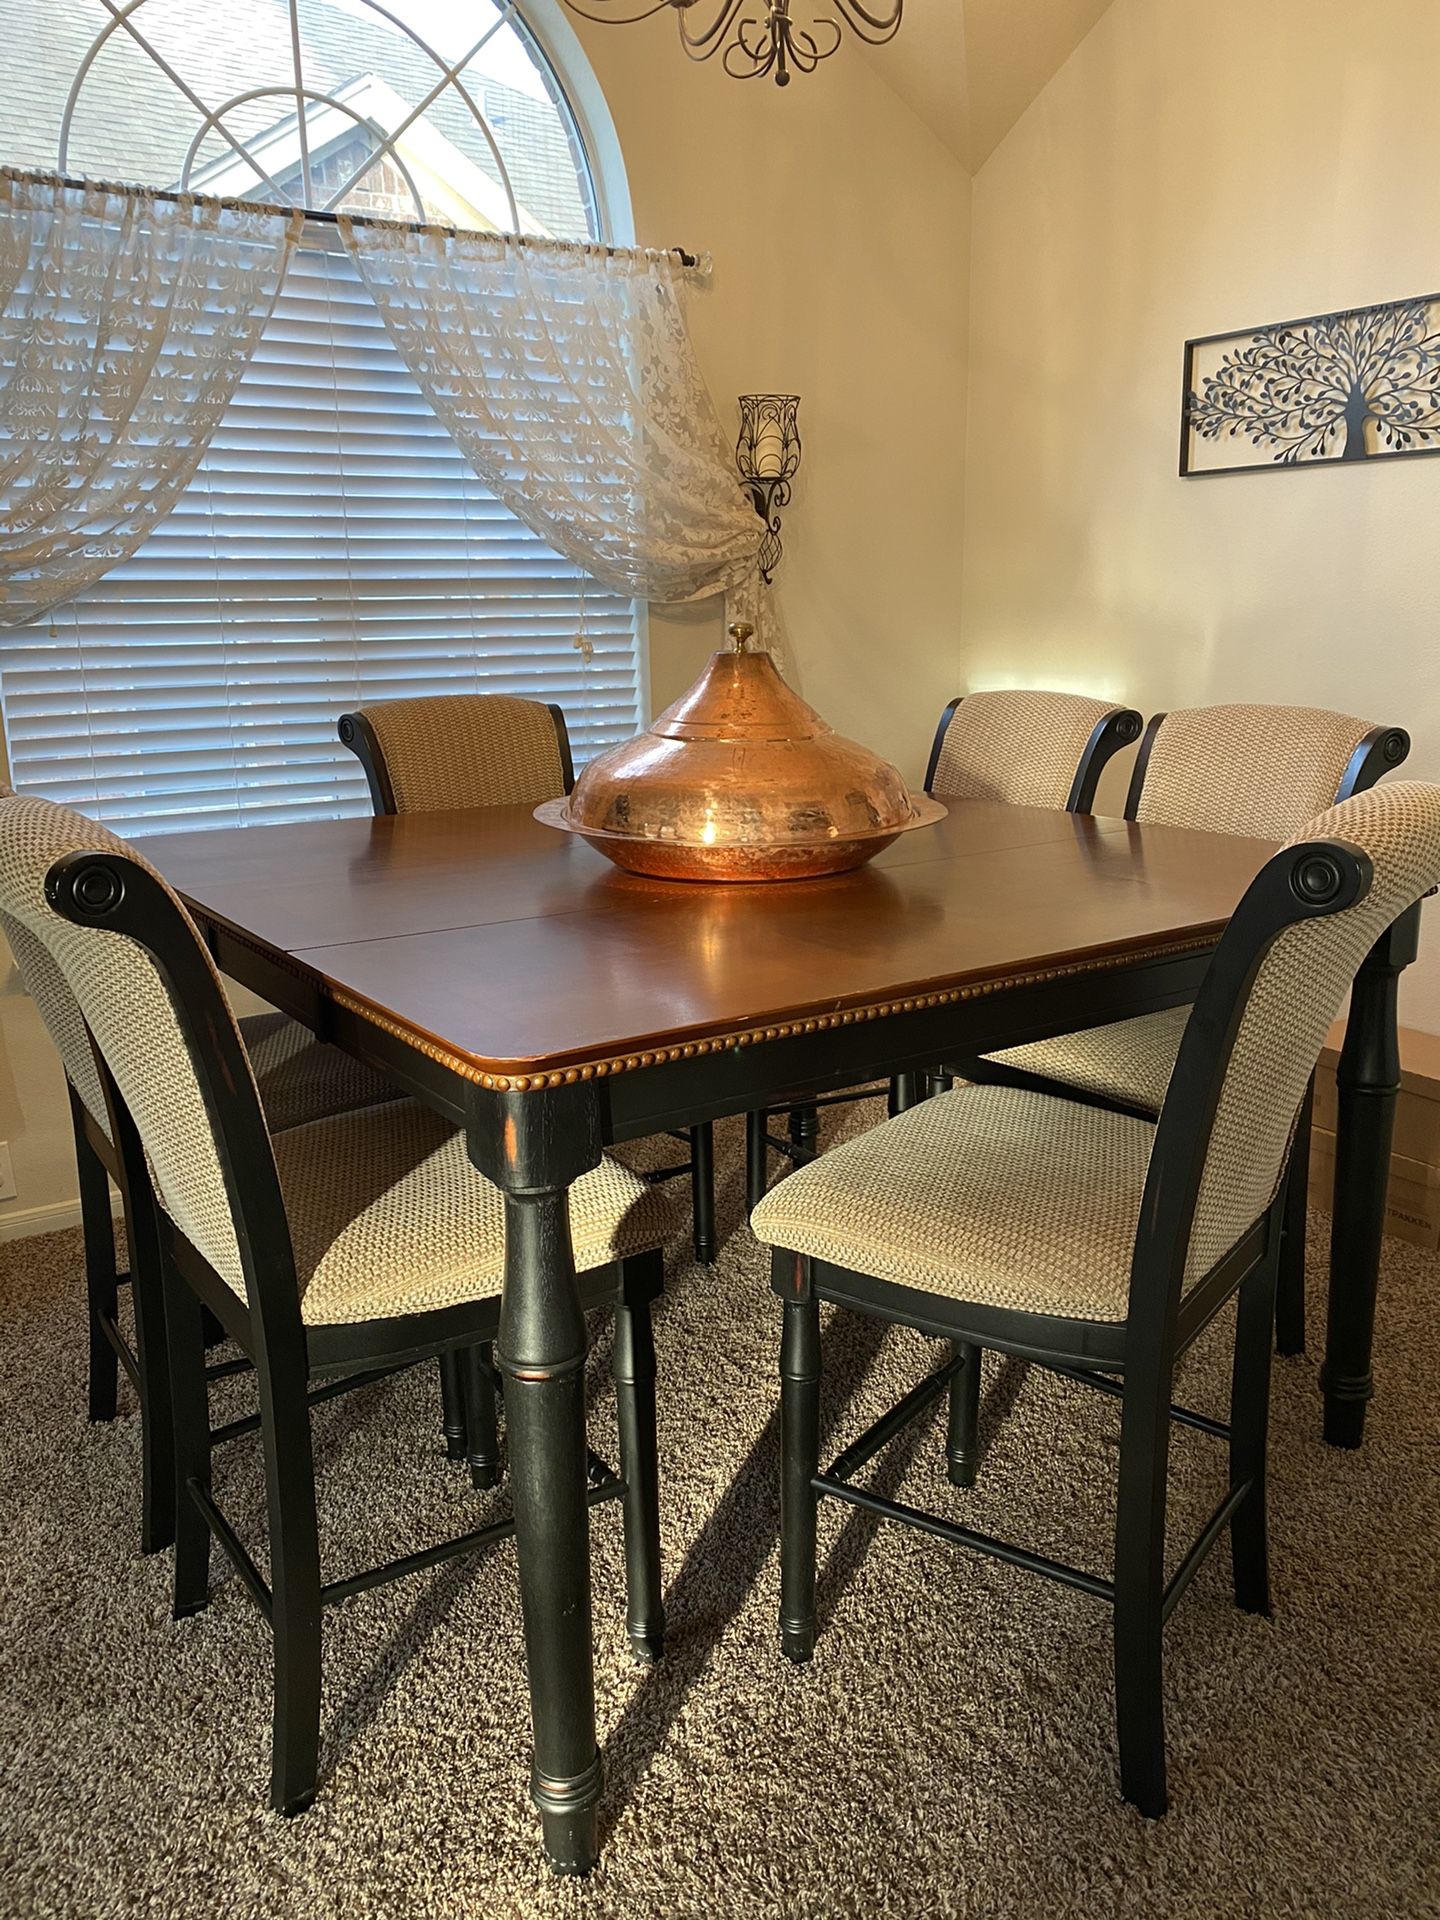 6 Chair Dining Table-Great Condition